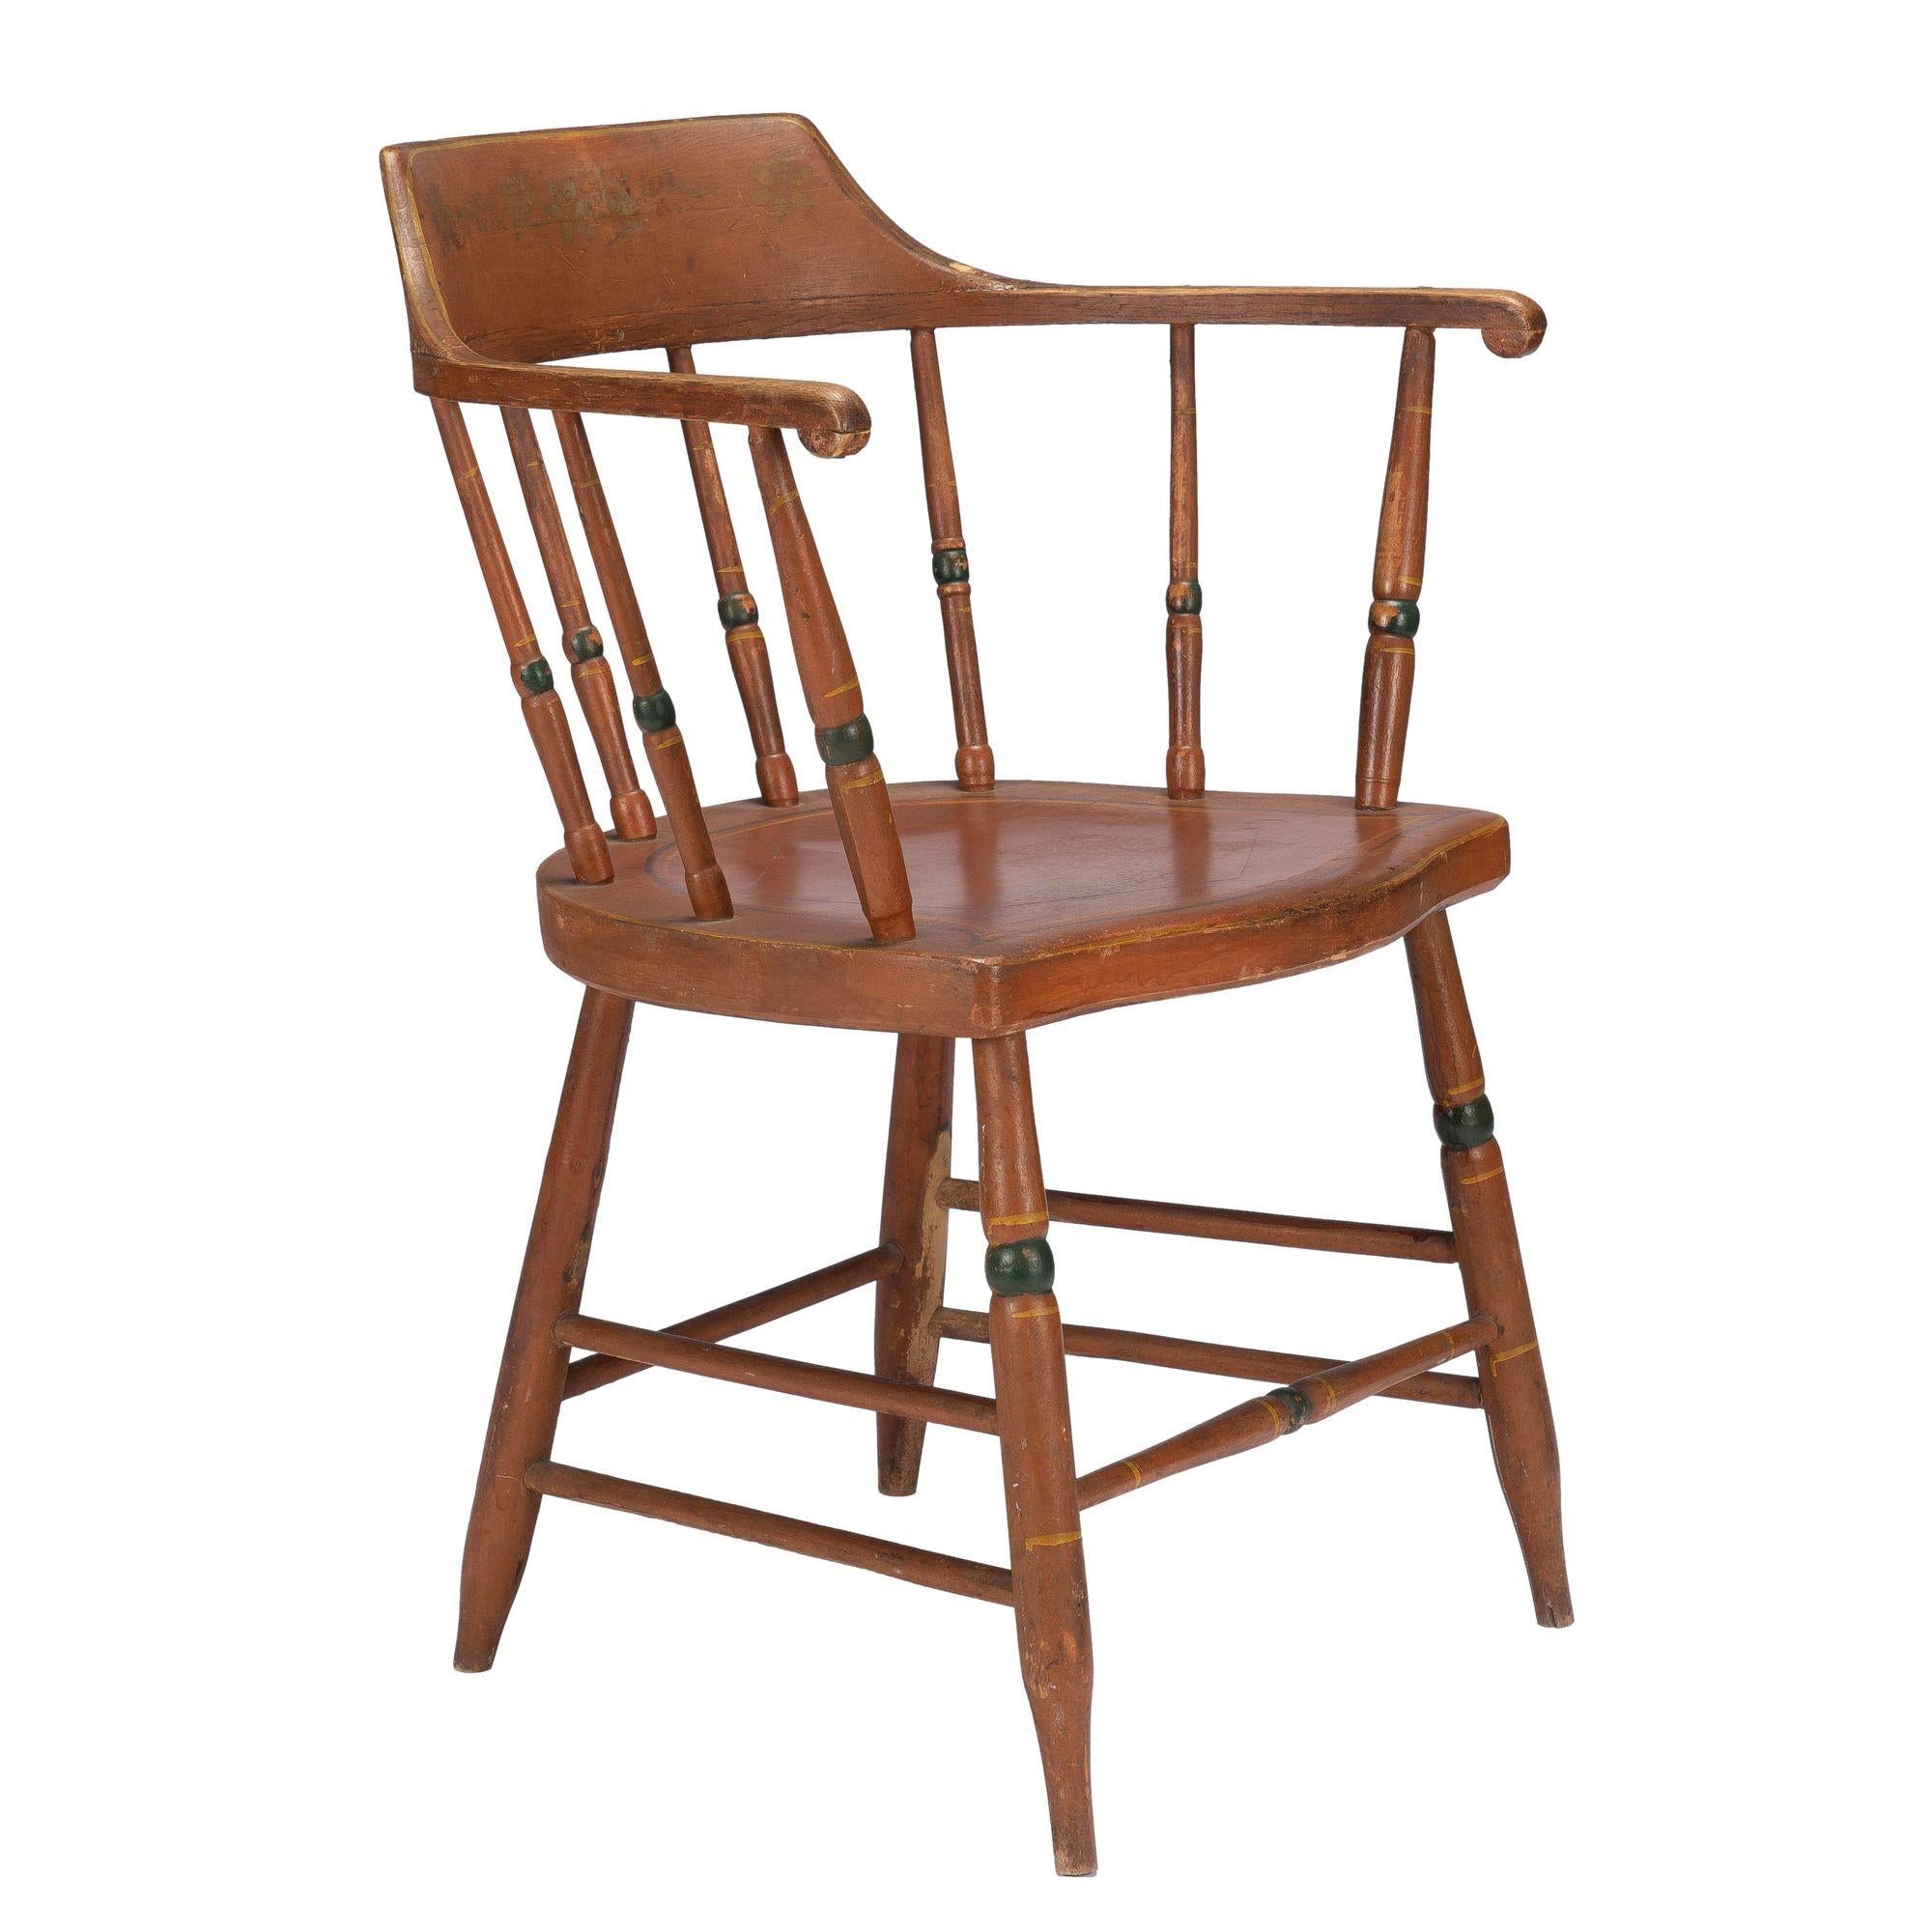 American Painted Windsor Captain's Chair, c. 1820 For Sale 2